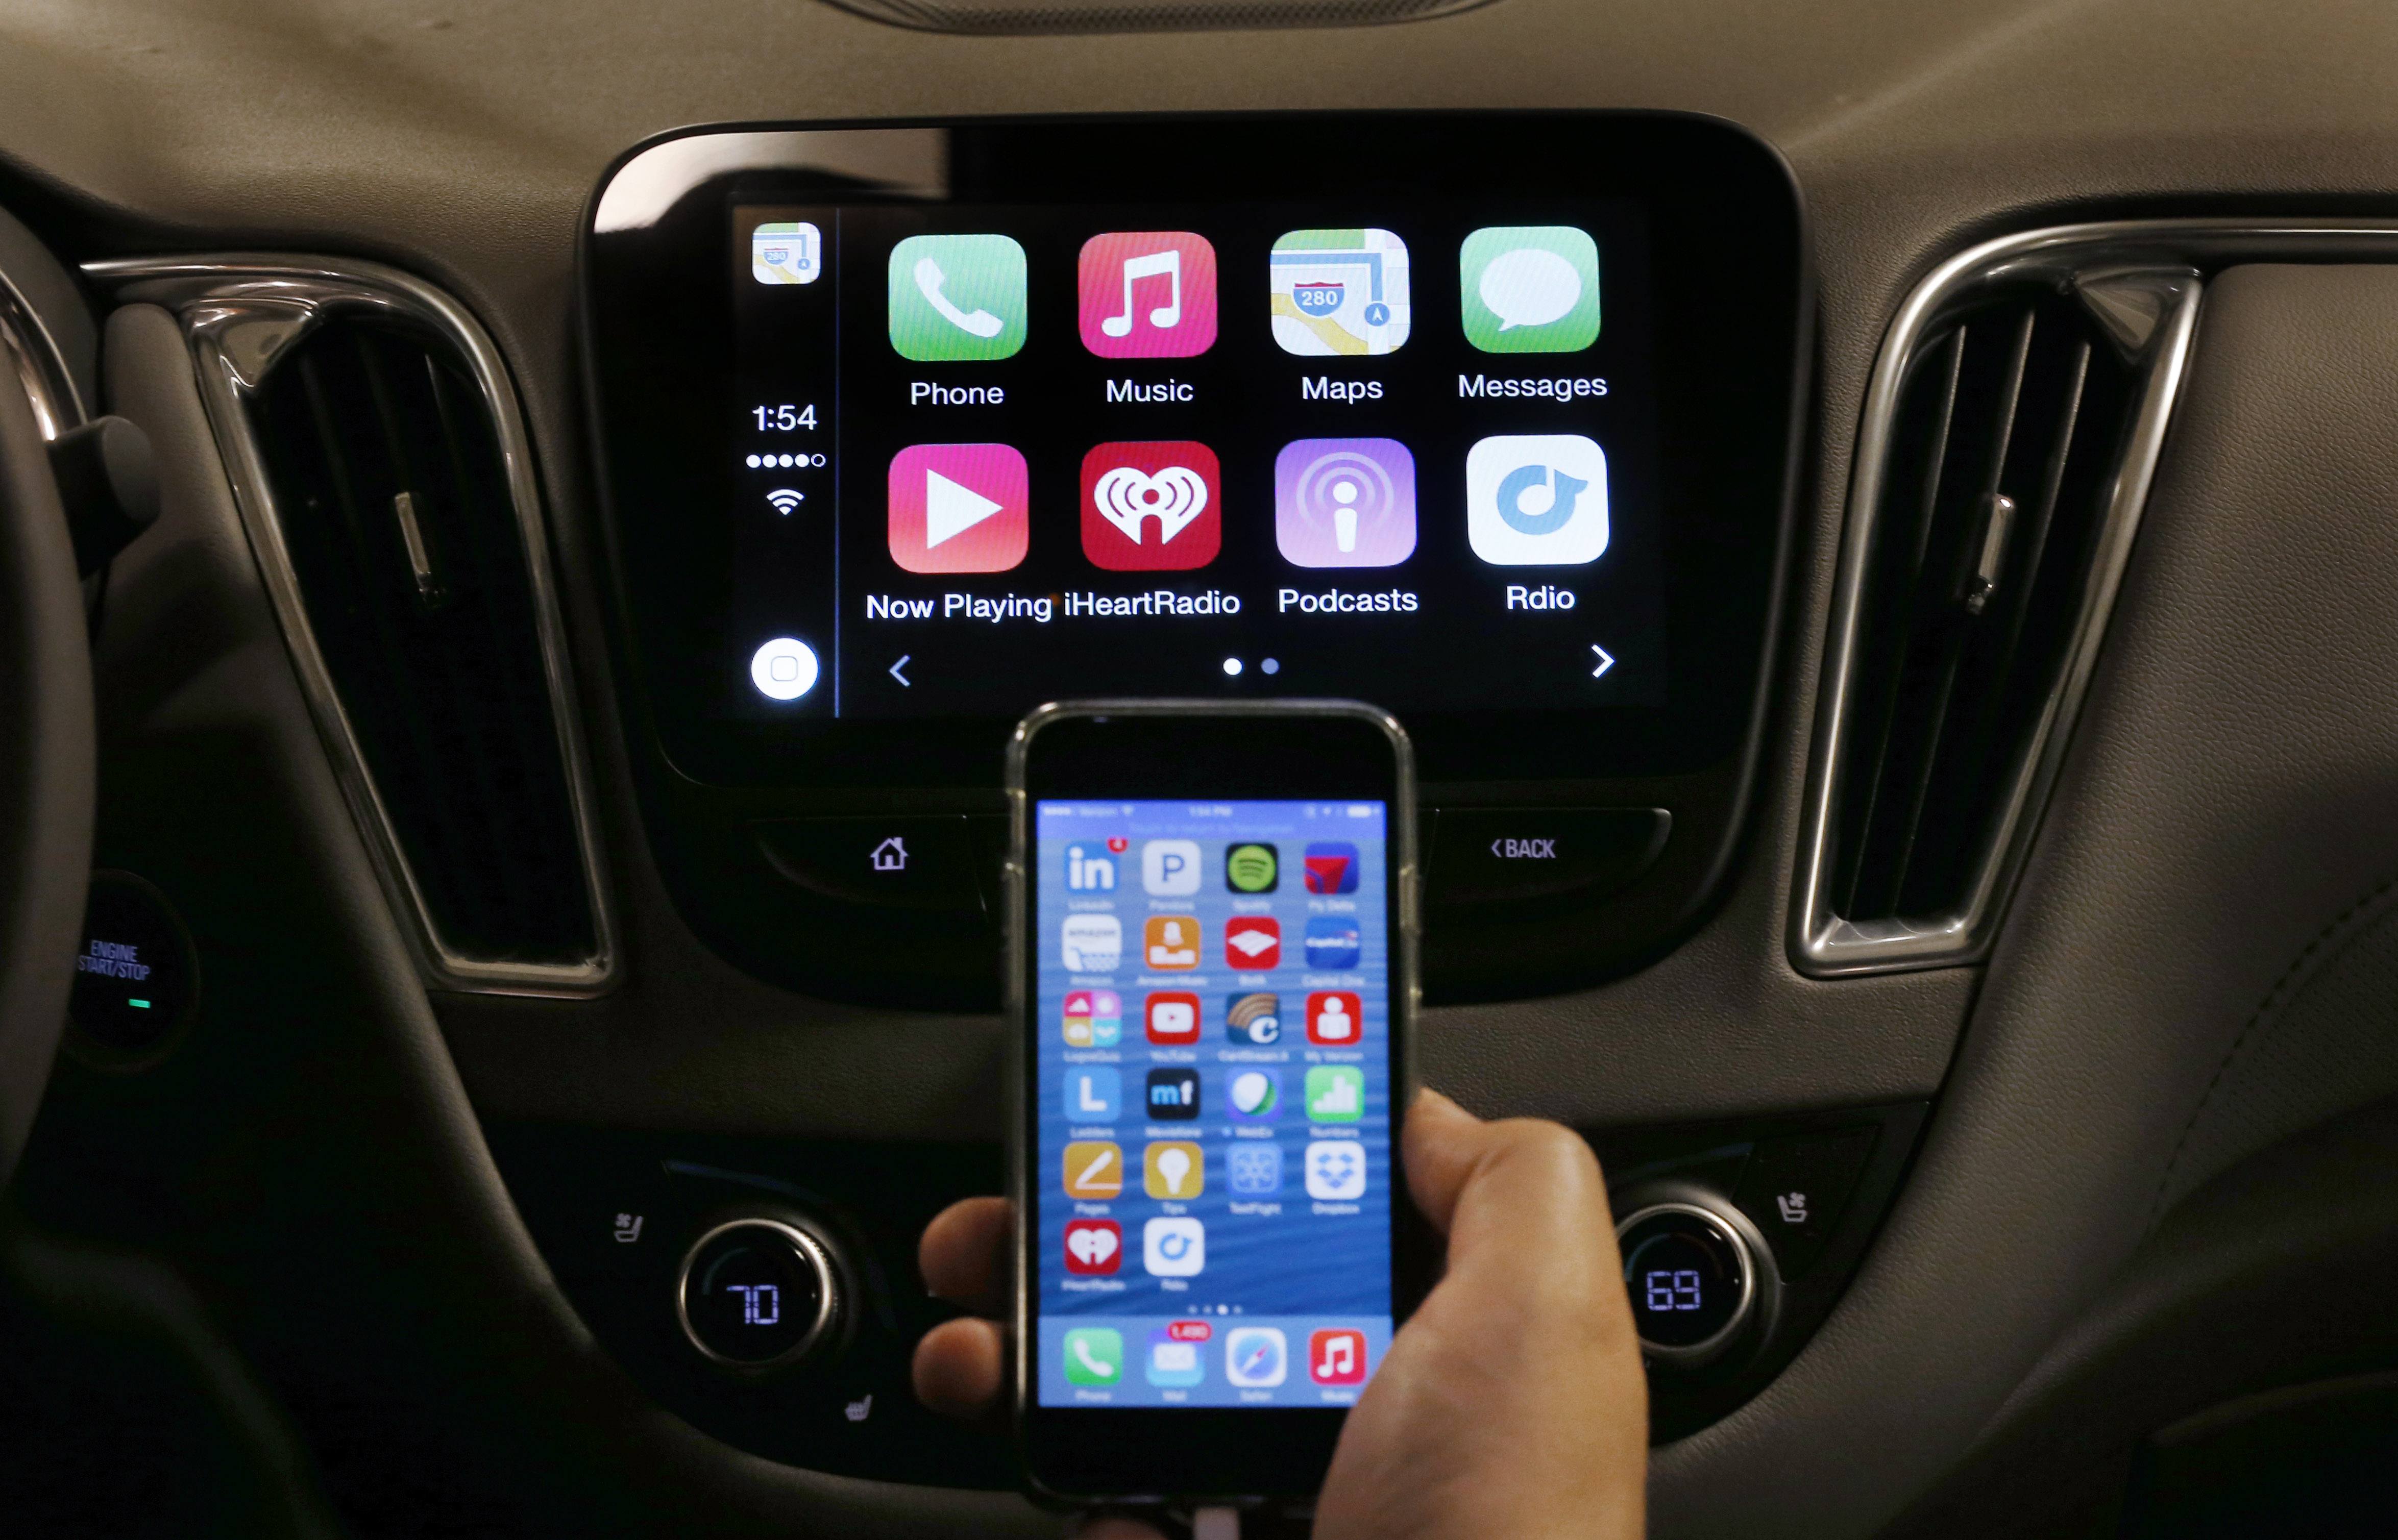 An iPhone is connected to a 2016 Chevrolet Malibu equipped with Apple CarPlay apps, displayed on the car's MyLink screen, top, during a demonstration in Detroit, Tuesday, May 26, 2015. Starting with Chevrolet this summer, many General Motors models will offer AppleÂ’s CarPlay and GoogleÂ’s Android Auto systems that link smart phones with in-car screens and electronics. (AP Photo/Paul Sancya)